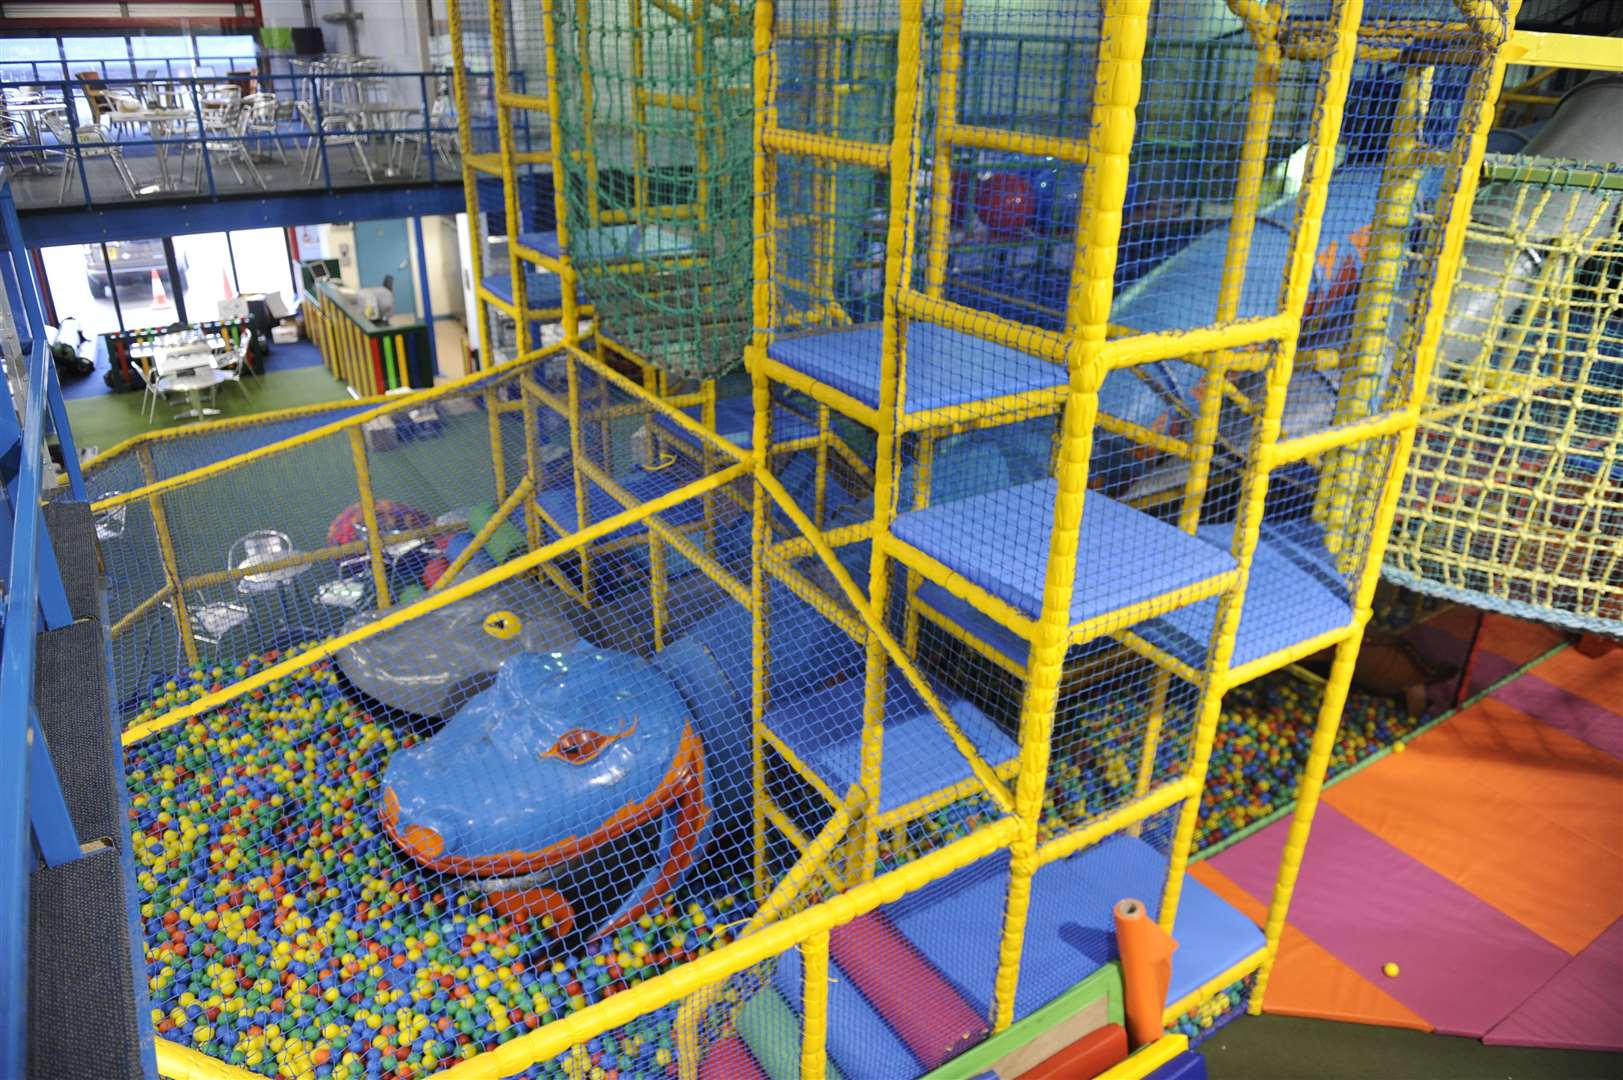 The soft play centre in Herne Bay